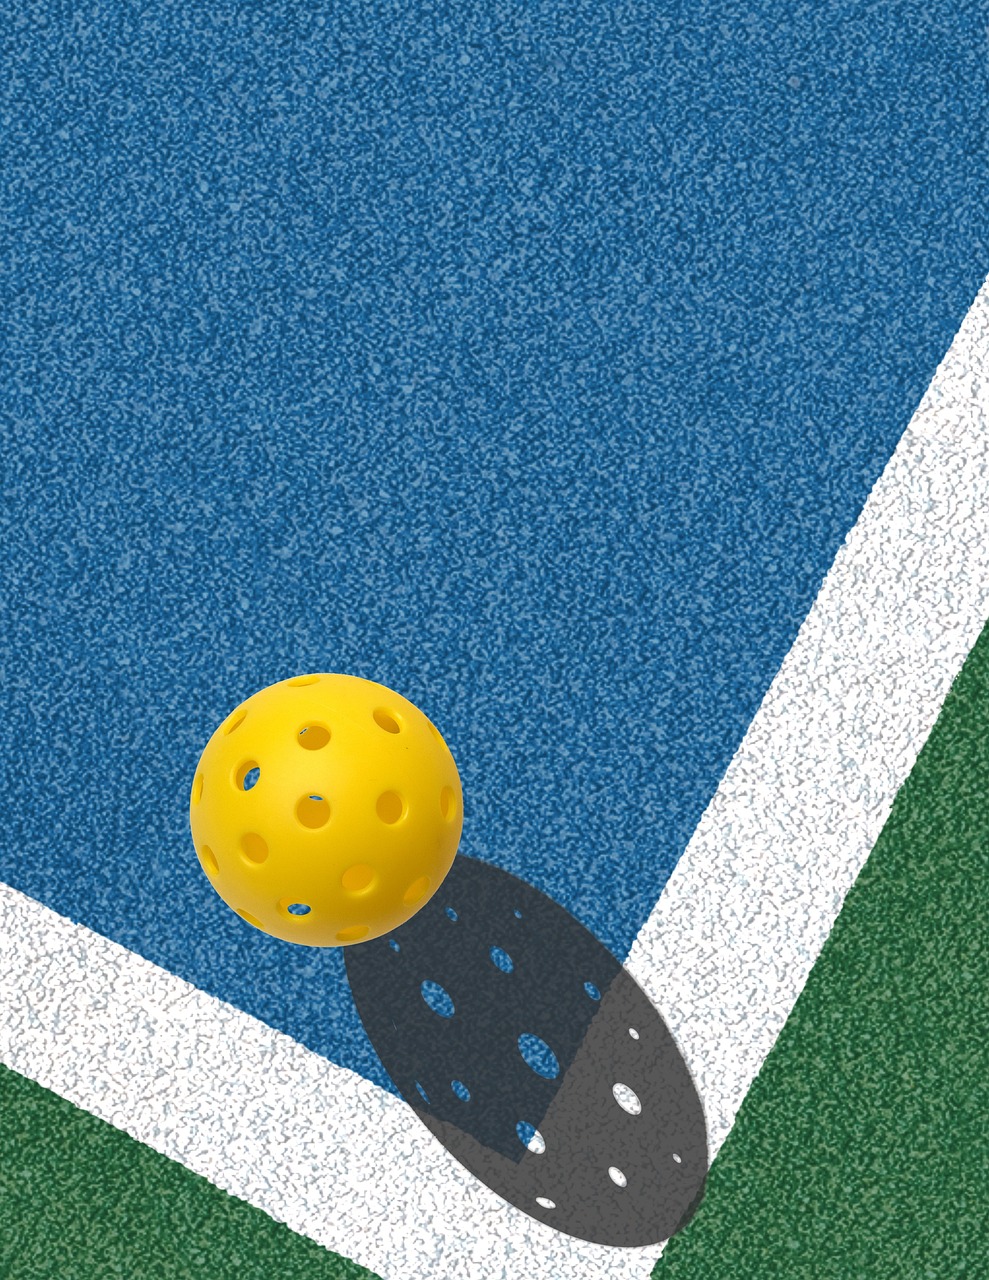 New Indoor Pickleball Facility Opening in York